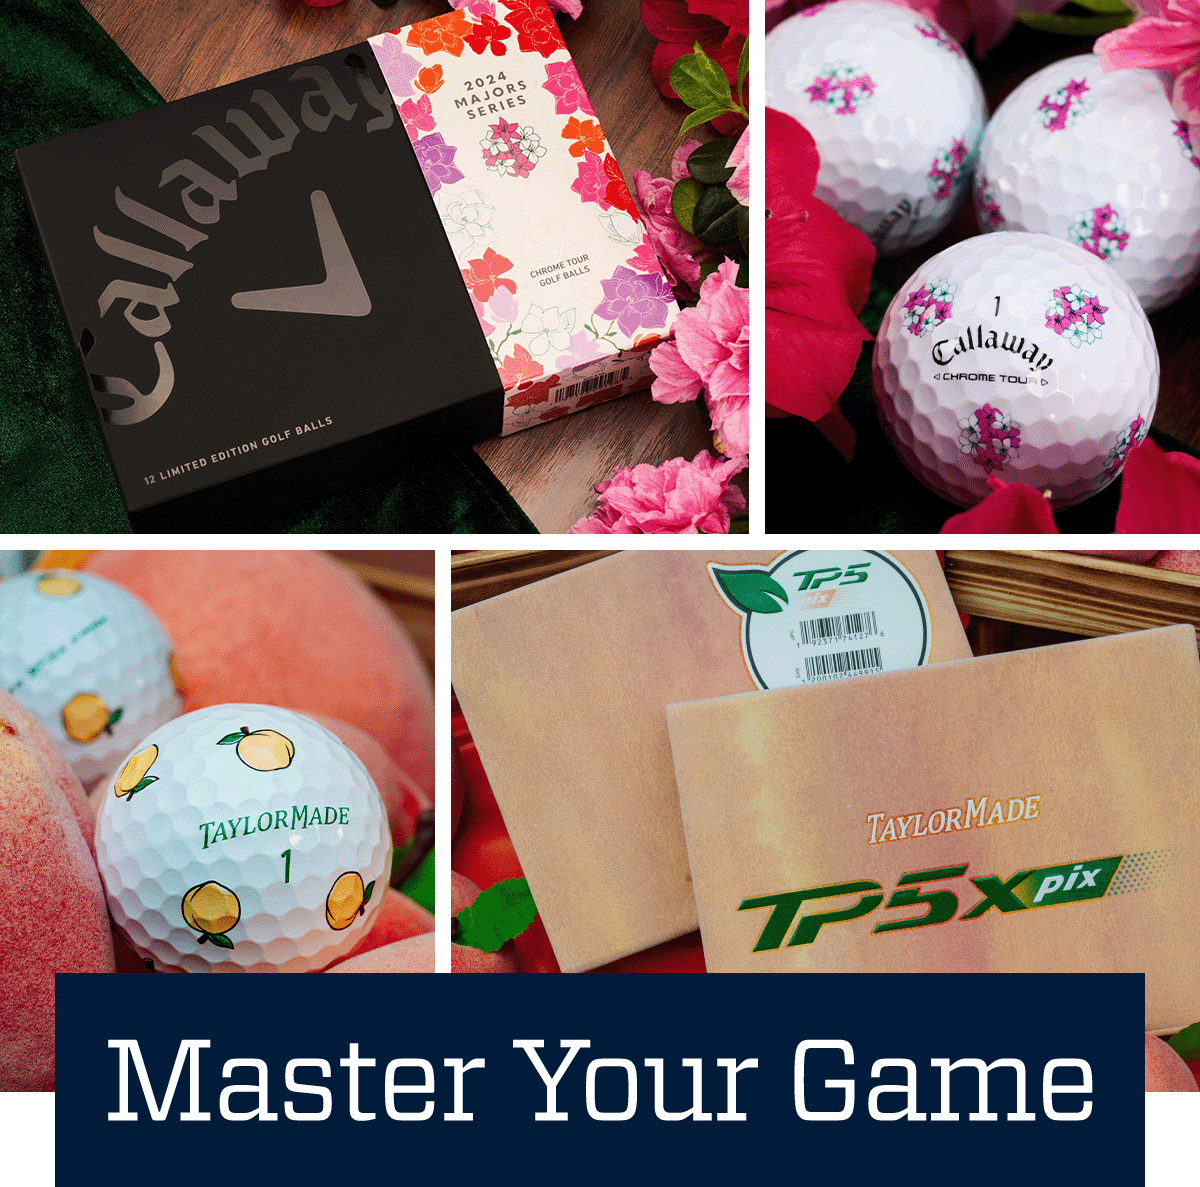  Master your game.